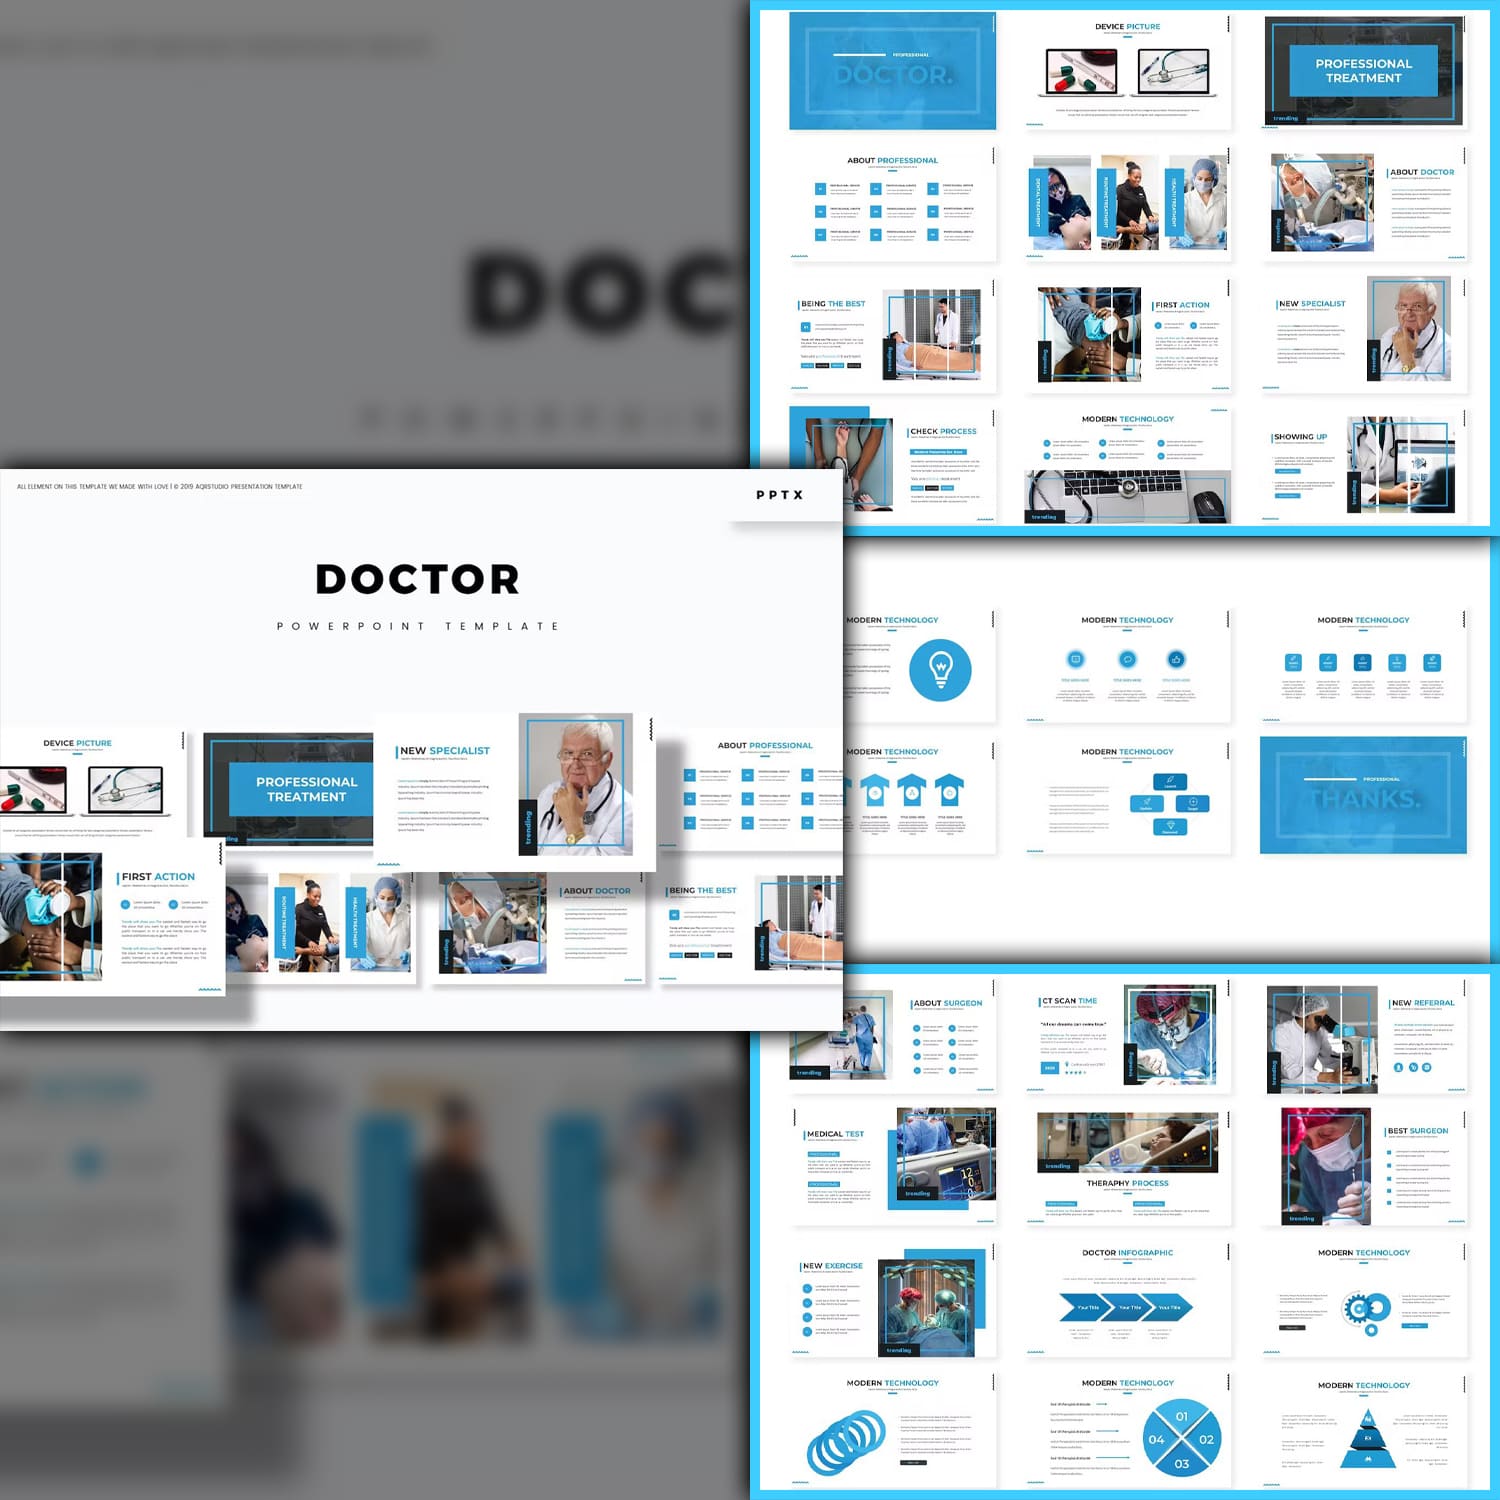 Doctor powerpoint template from aqrstudio.